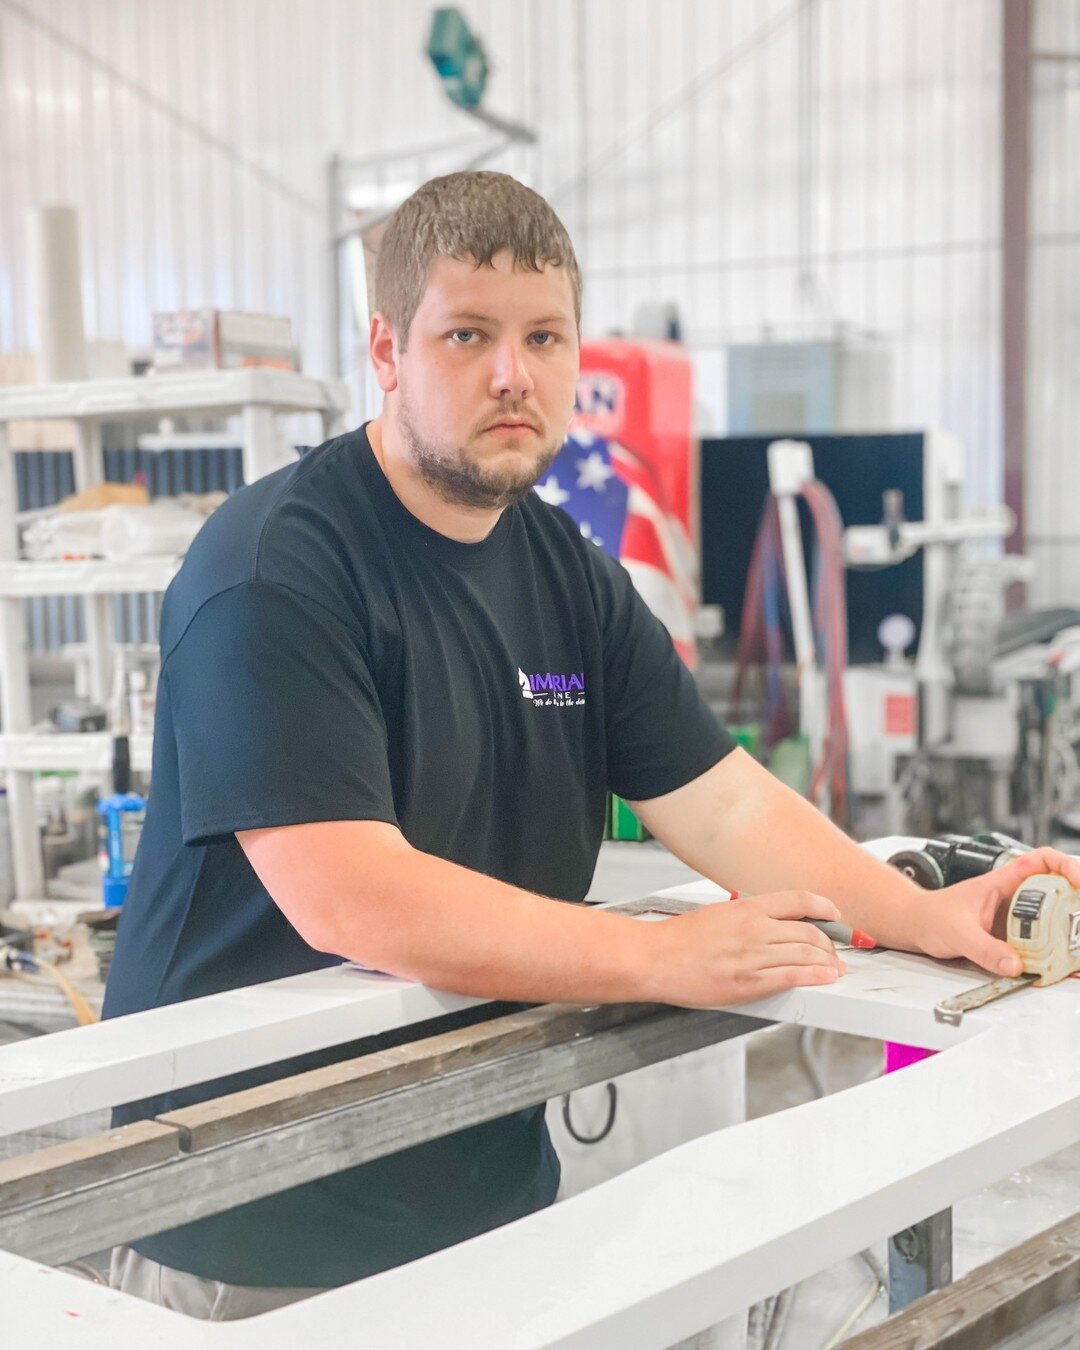 MEET 
Steve
Fabricator

Steve has been with Imperial Stone since 2017. He works in the fabrication shop moving stone, polishing, and performing other duties. Steve is a vital part of our team and takes great pride in his work. His favorite part of th